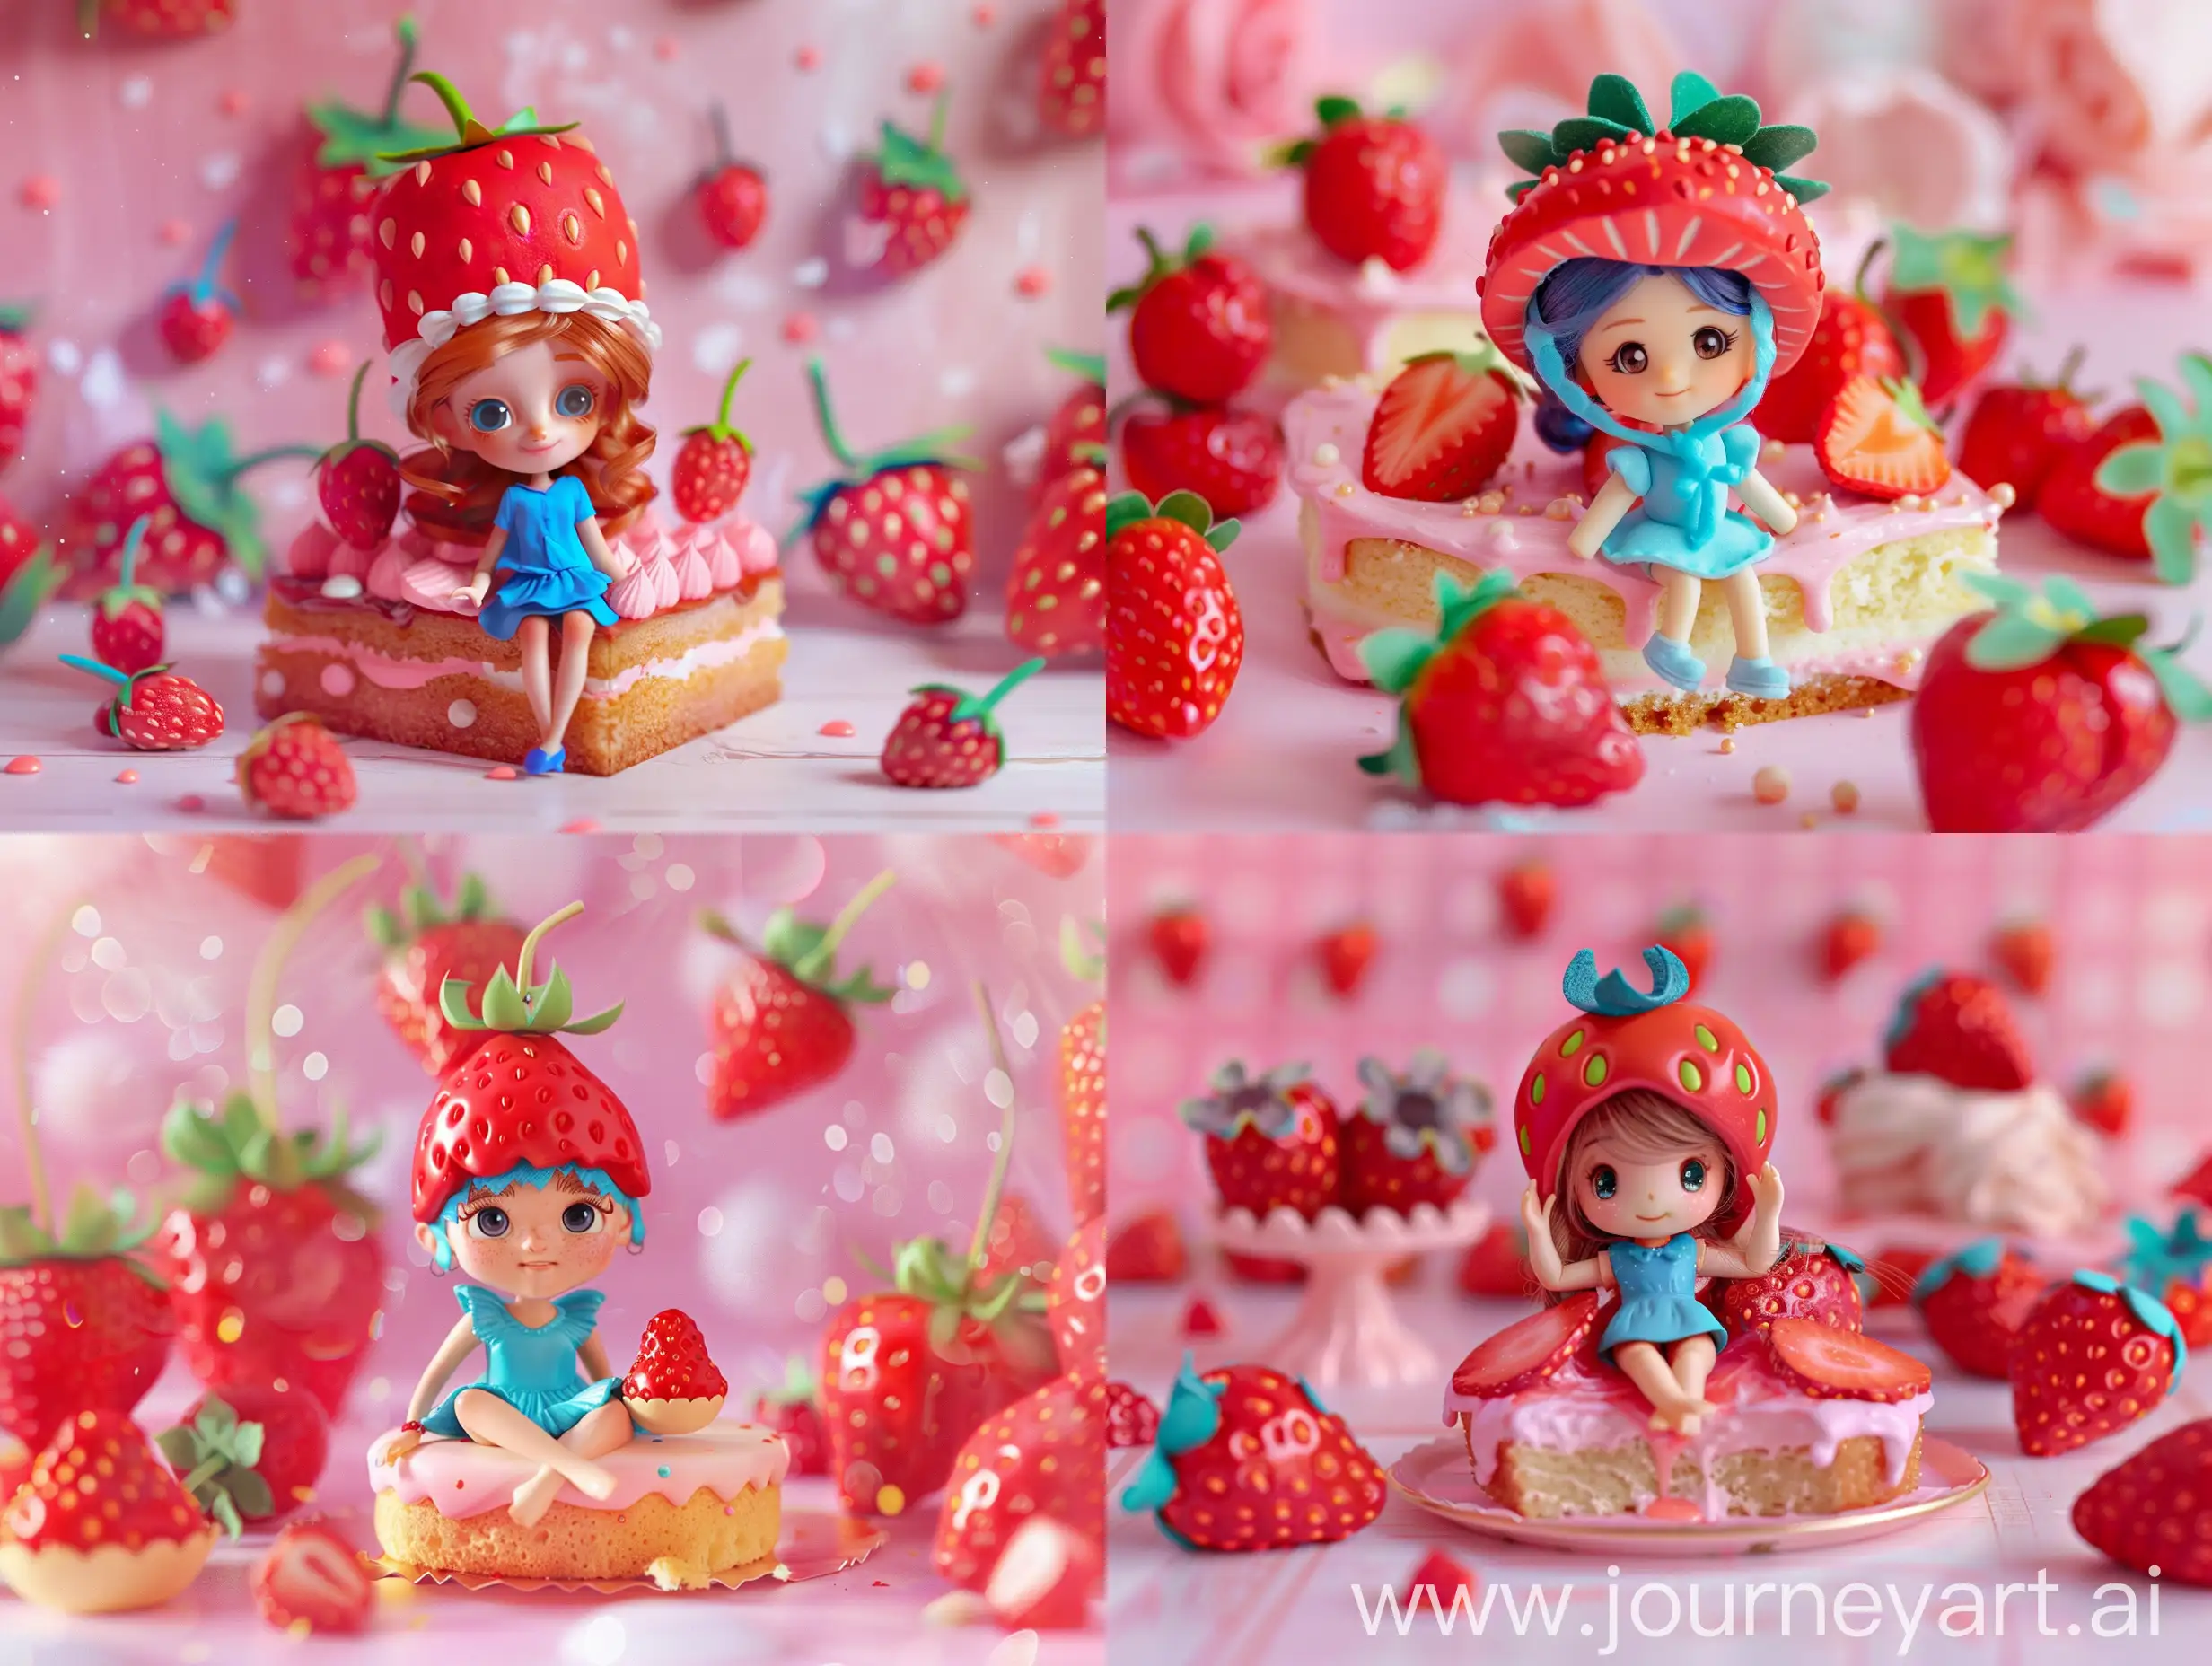 Playful-Girl-Sitting-on-Cake-with-Strawberry-Hat-in-Pink-Strawberrythemed-Setting